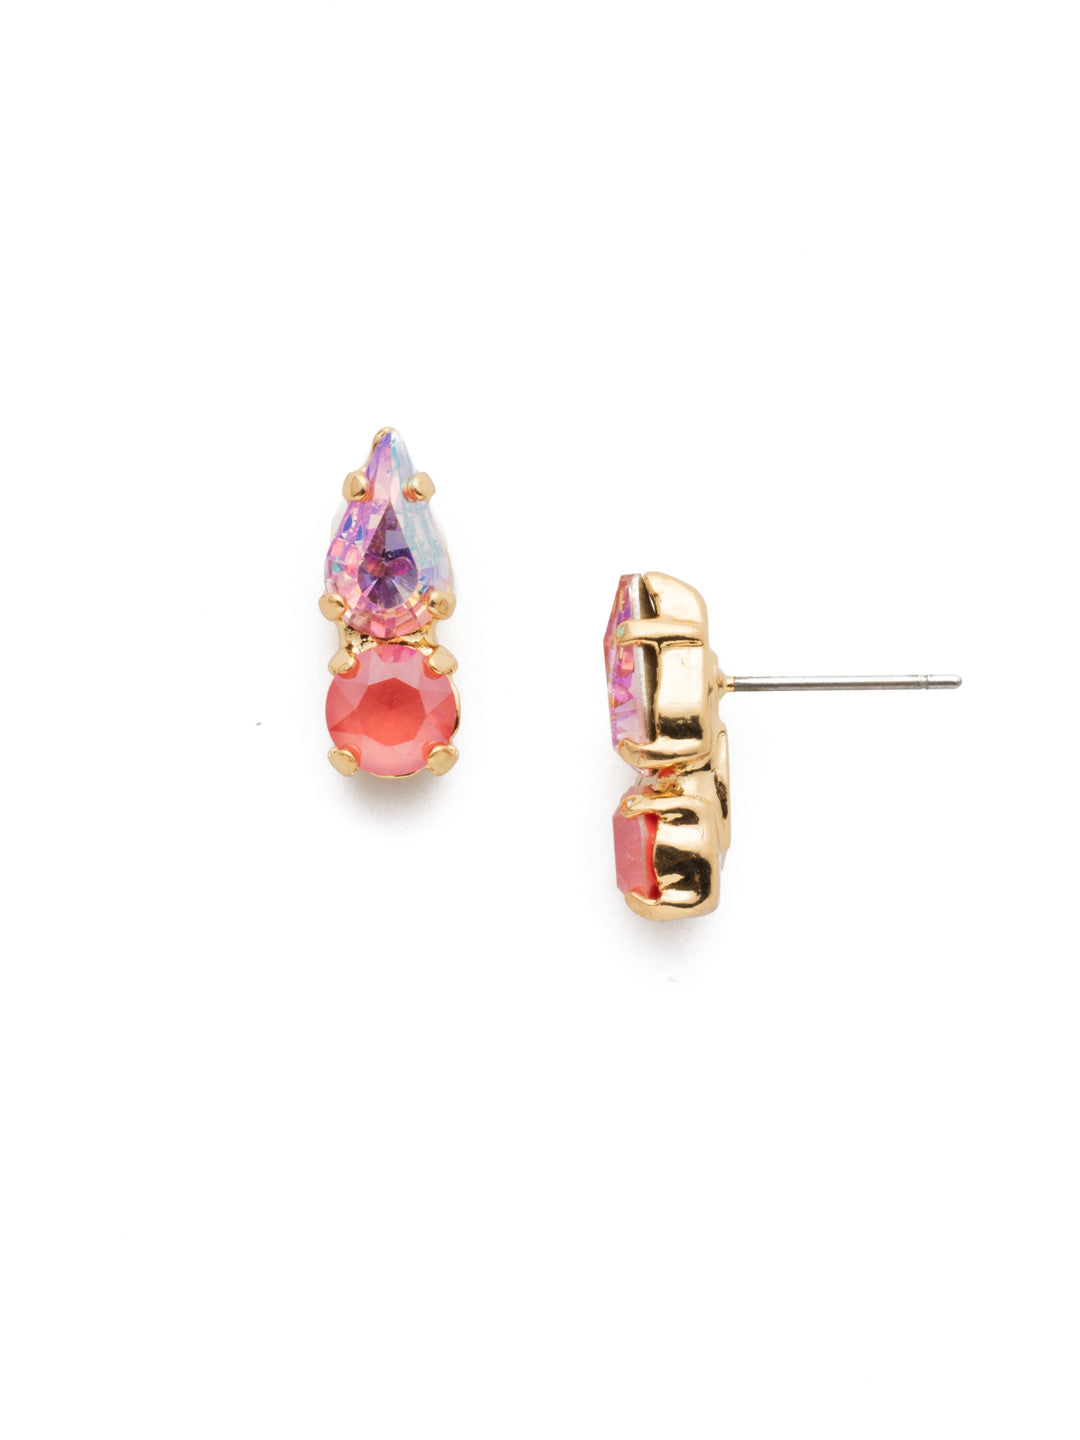 Julia Stud Earrings - EEN32BGBGA - The Julia Stud Earrings are wardrobe essentials. Small-yet-stunning pear and circular crystals combine for something special to fasten on anytime. From Sorrelli's Begonia collection in our Bright Gold-tone finish.